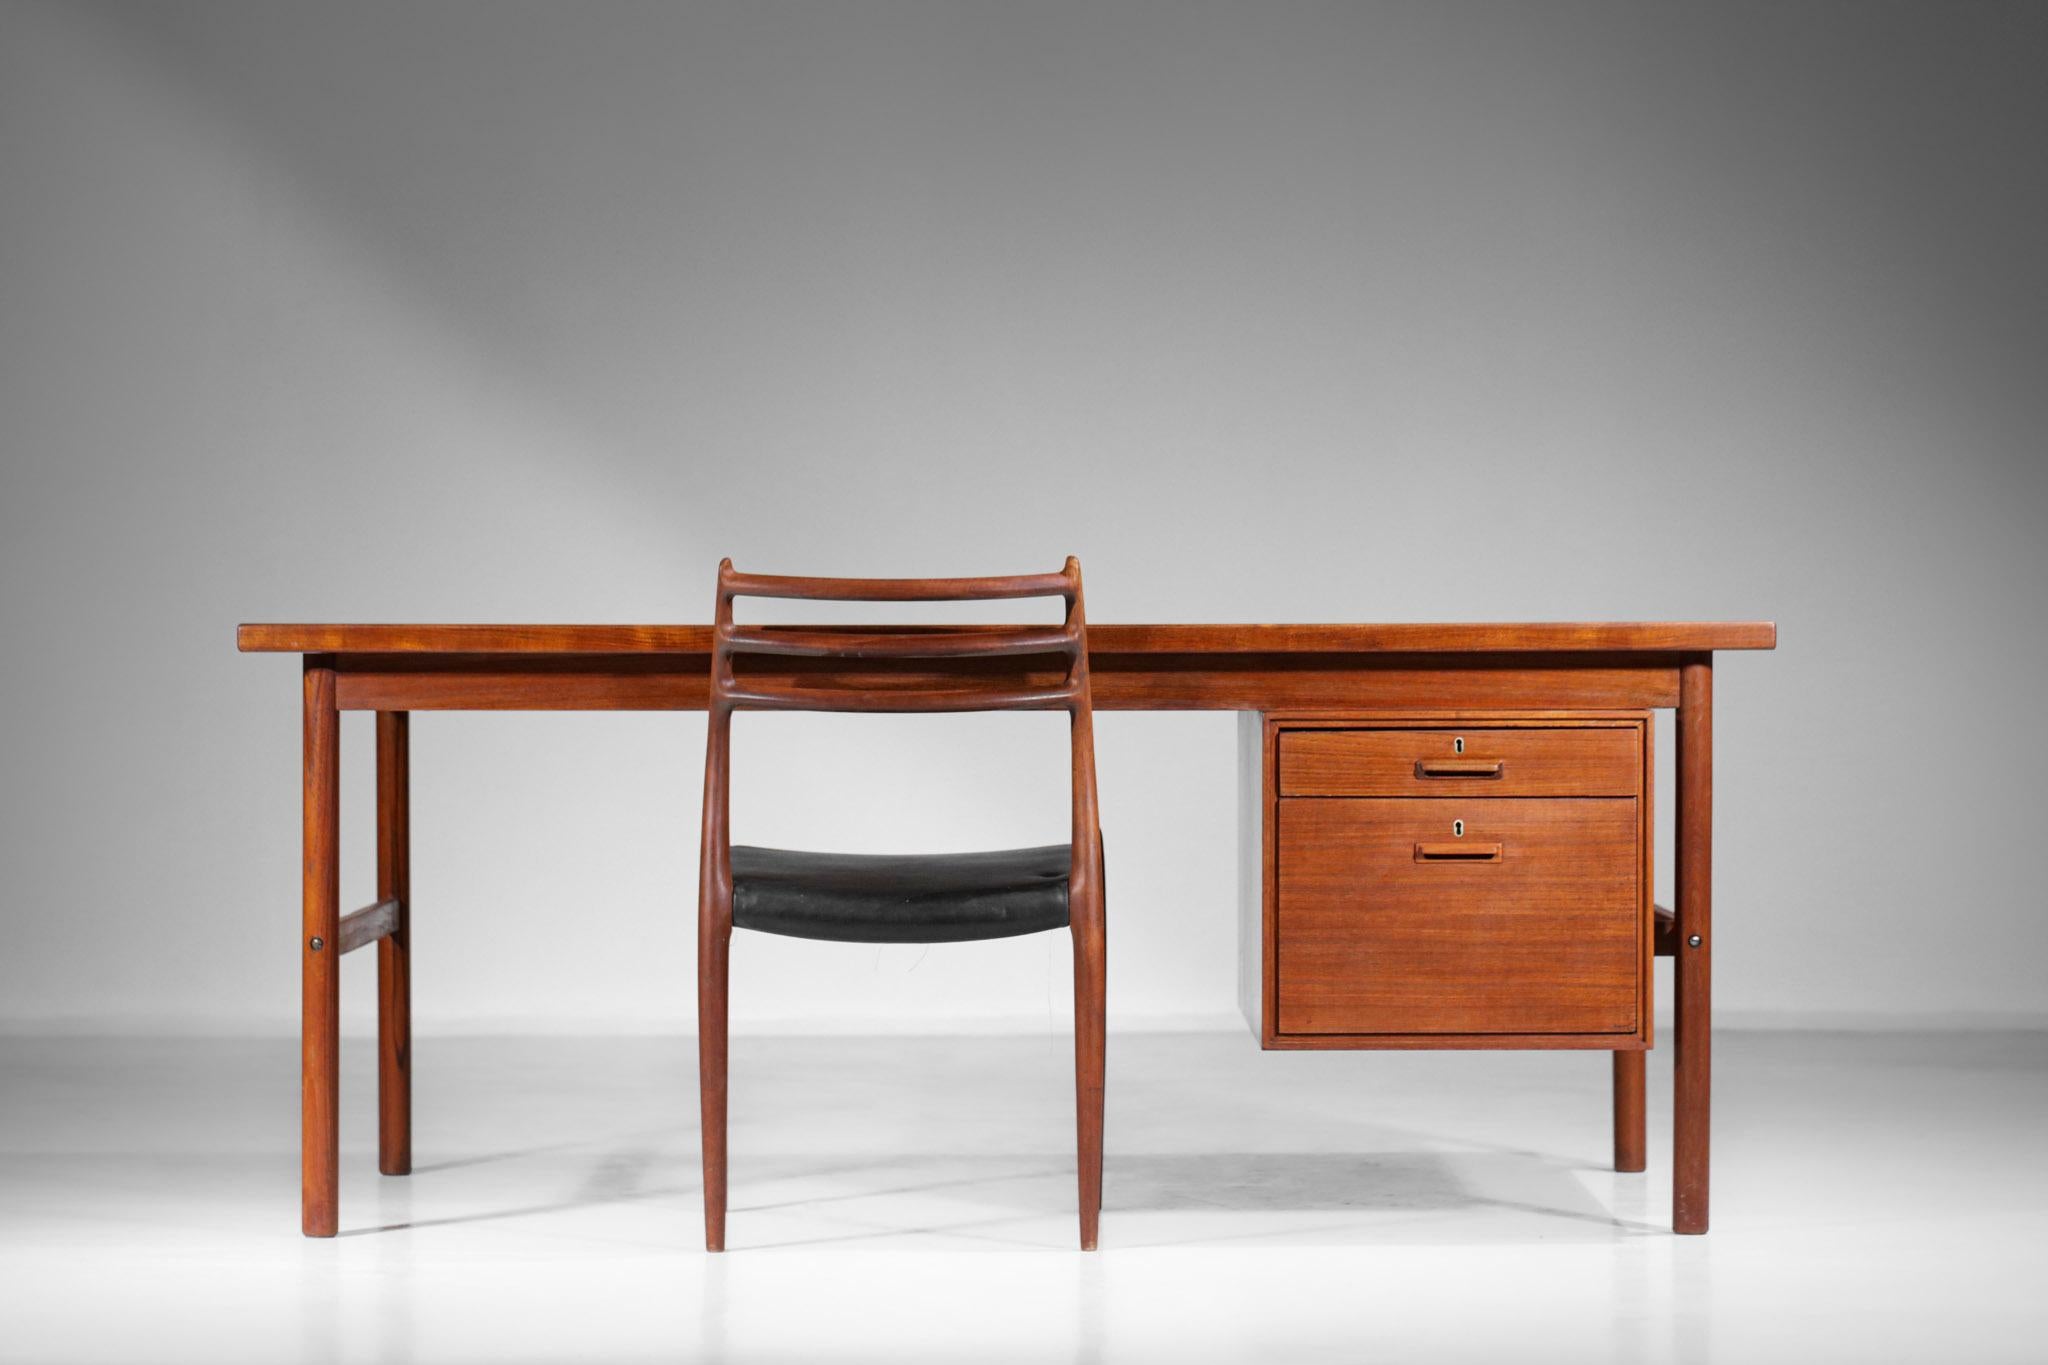 Scandinavian desk from the 1960s in the style of Kai Kristiansen's work. Structure in solid teak and teak veneer, consisting of a hanging cabinet with two drawers on one side and a shelf with a hinged door on the other and a retractable shelf. The